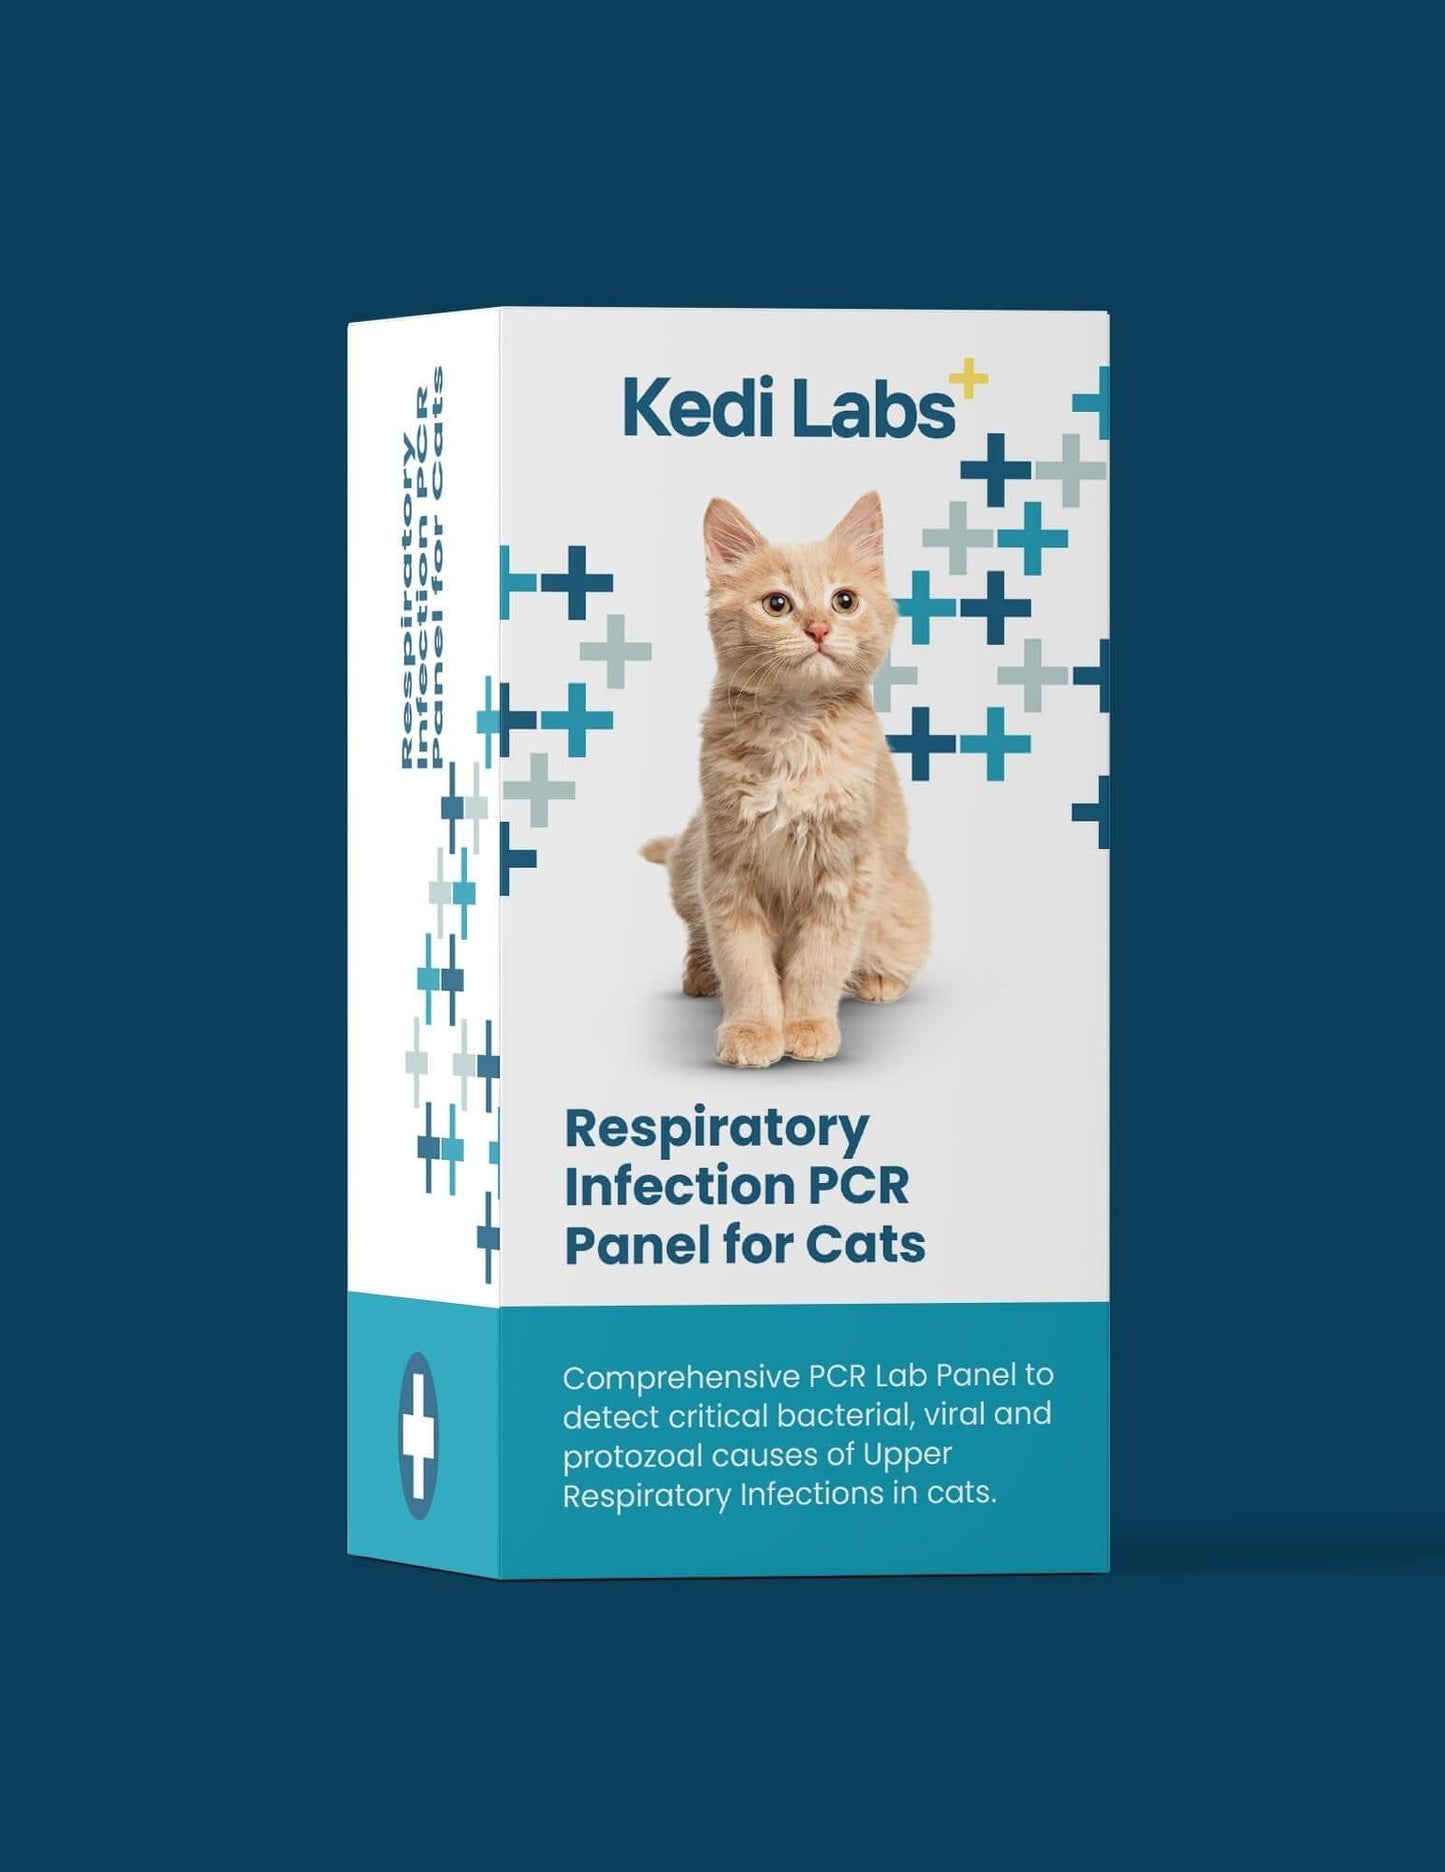 Respiratory Infection PCR Panel for Cats - Kedi Labs